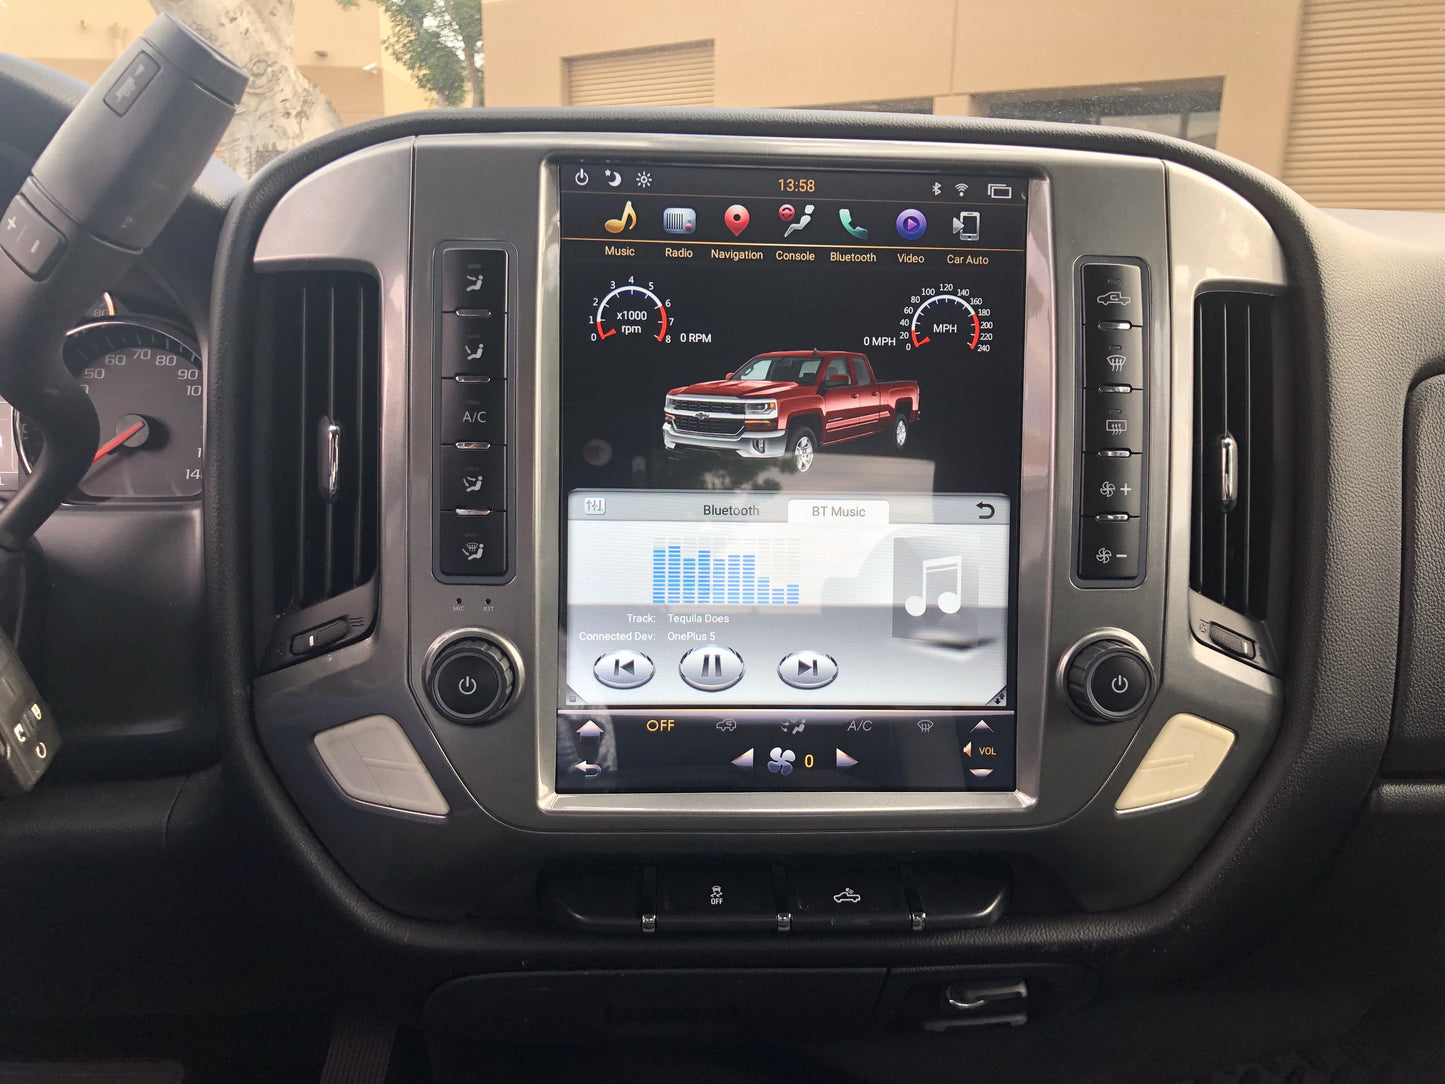 [ PX6 SIX-CORE ] [Special Edition] 12.1" Android 9 Fast boot Navi Radio for Chevy Silverado GMC SIERRA 2014 - 2019-Phoenix Automotive